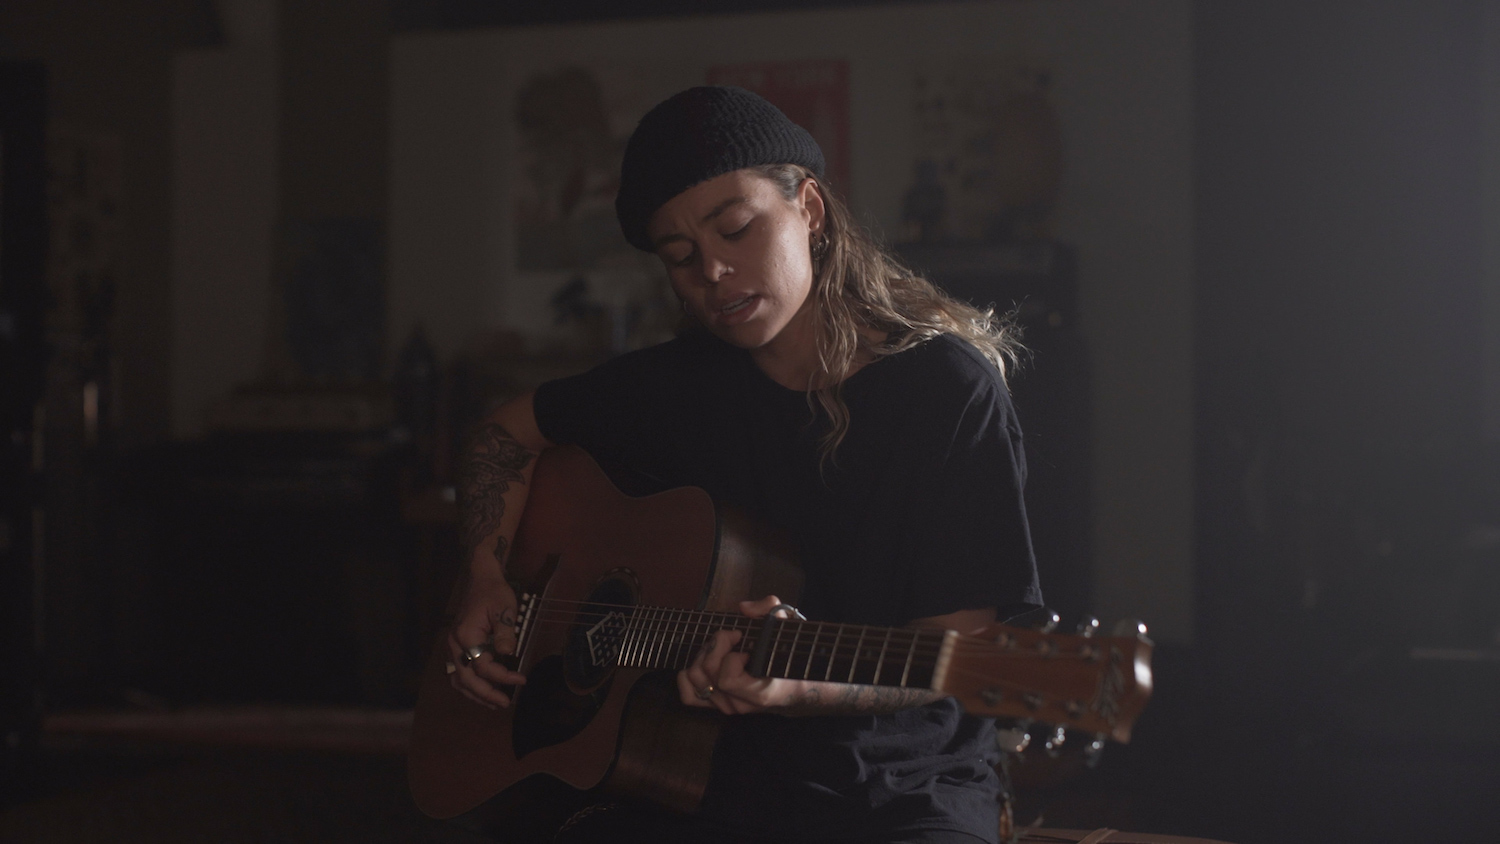 Tash Sultana records cover track for PlayStation’s ‘The Last Of Us Part II’